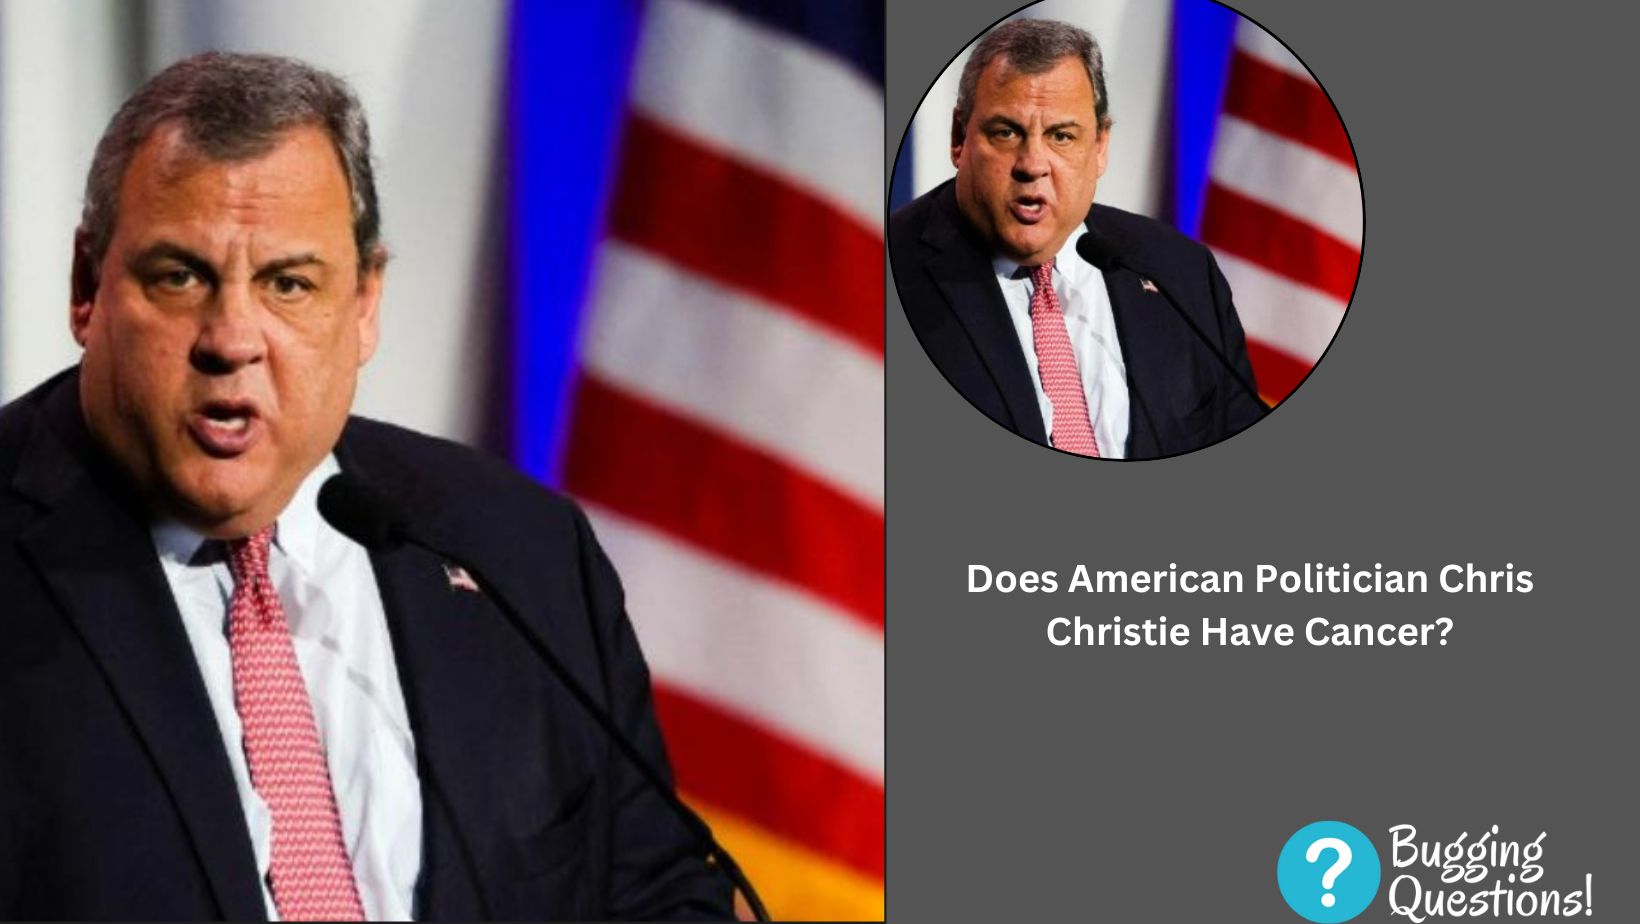 Does American Politician Chris Christie Have Cancer?